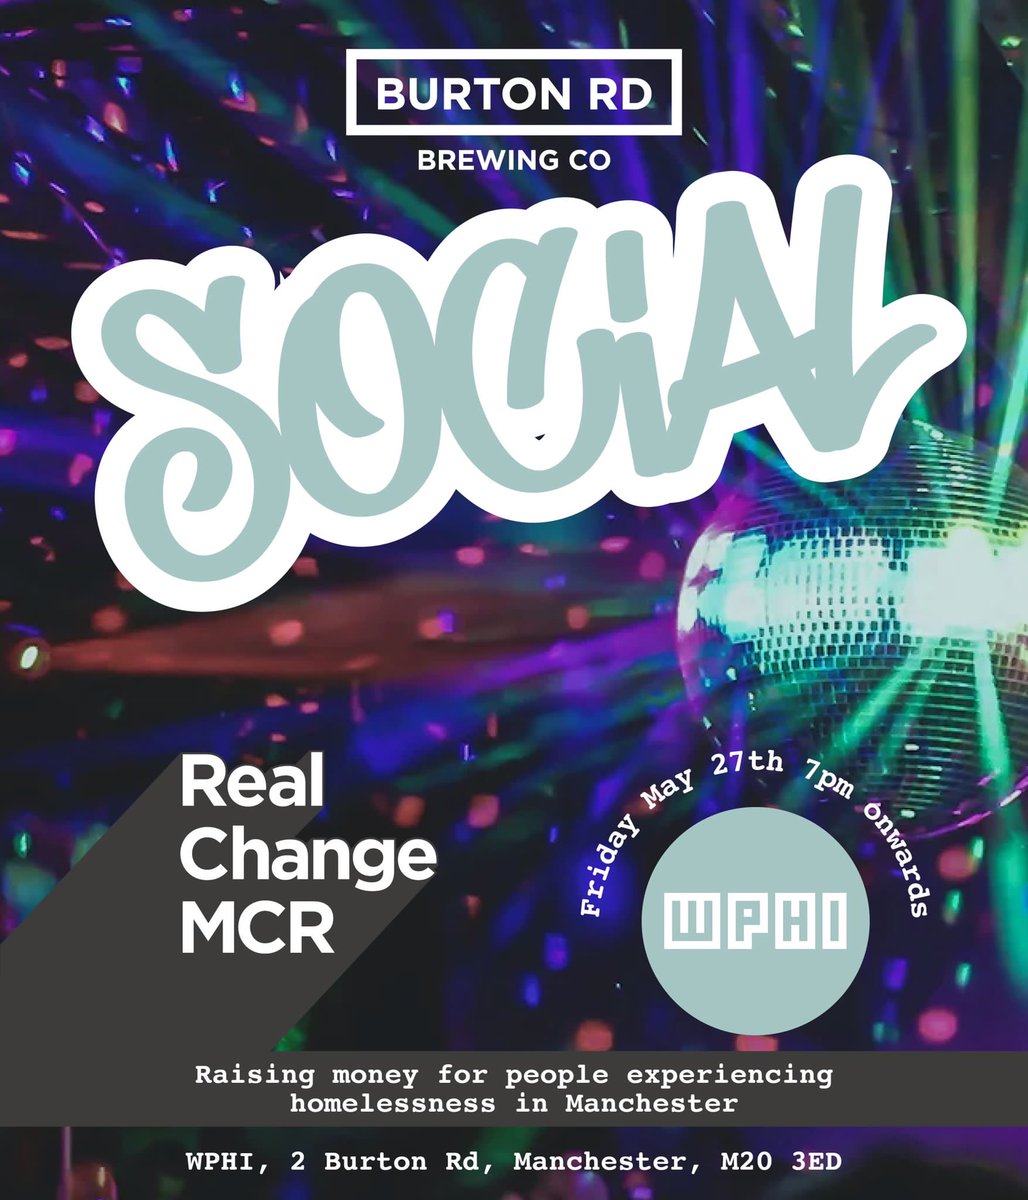 Really looking forward to the next @burtonrdbrewing social tonight @withypublichall. We're raising money for @RealChangeMANC again tonight. Hopefully see you there!